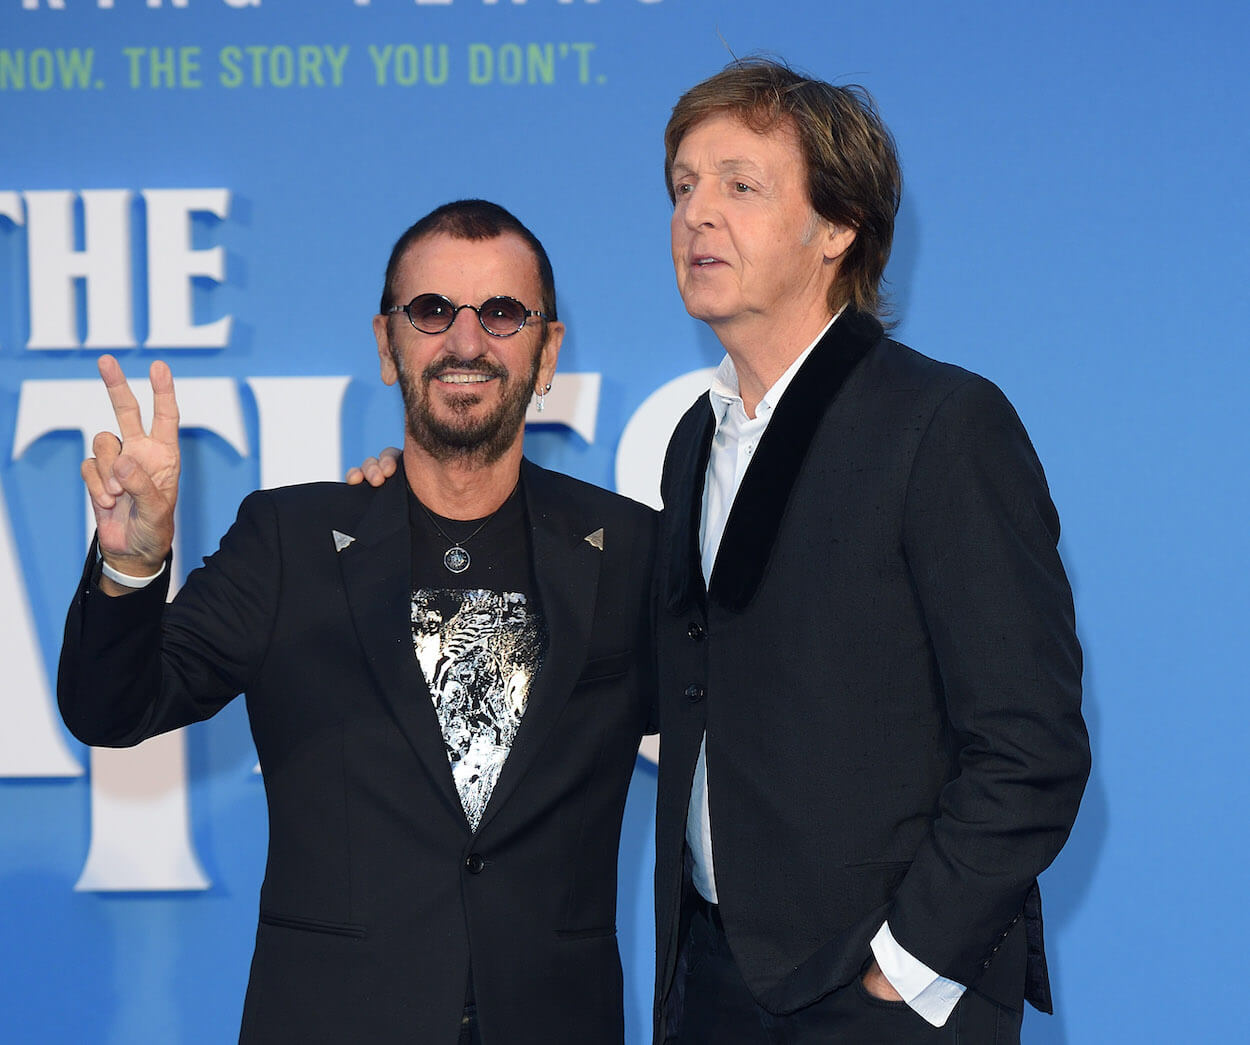 Ringo Starr (left) and Paul McCartney stand side-by-side before the world premier of 'The Beatles: Eight Days A Week' in 2016.